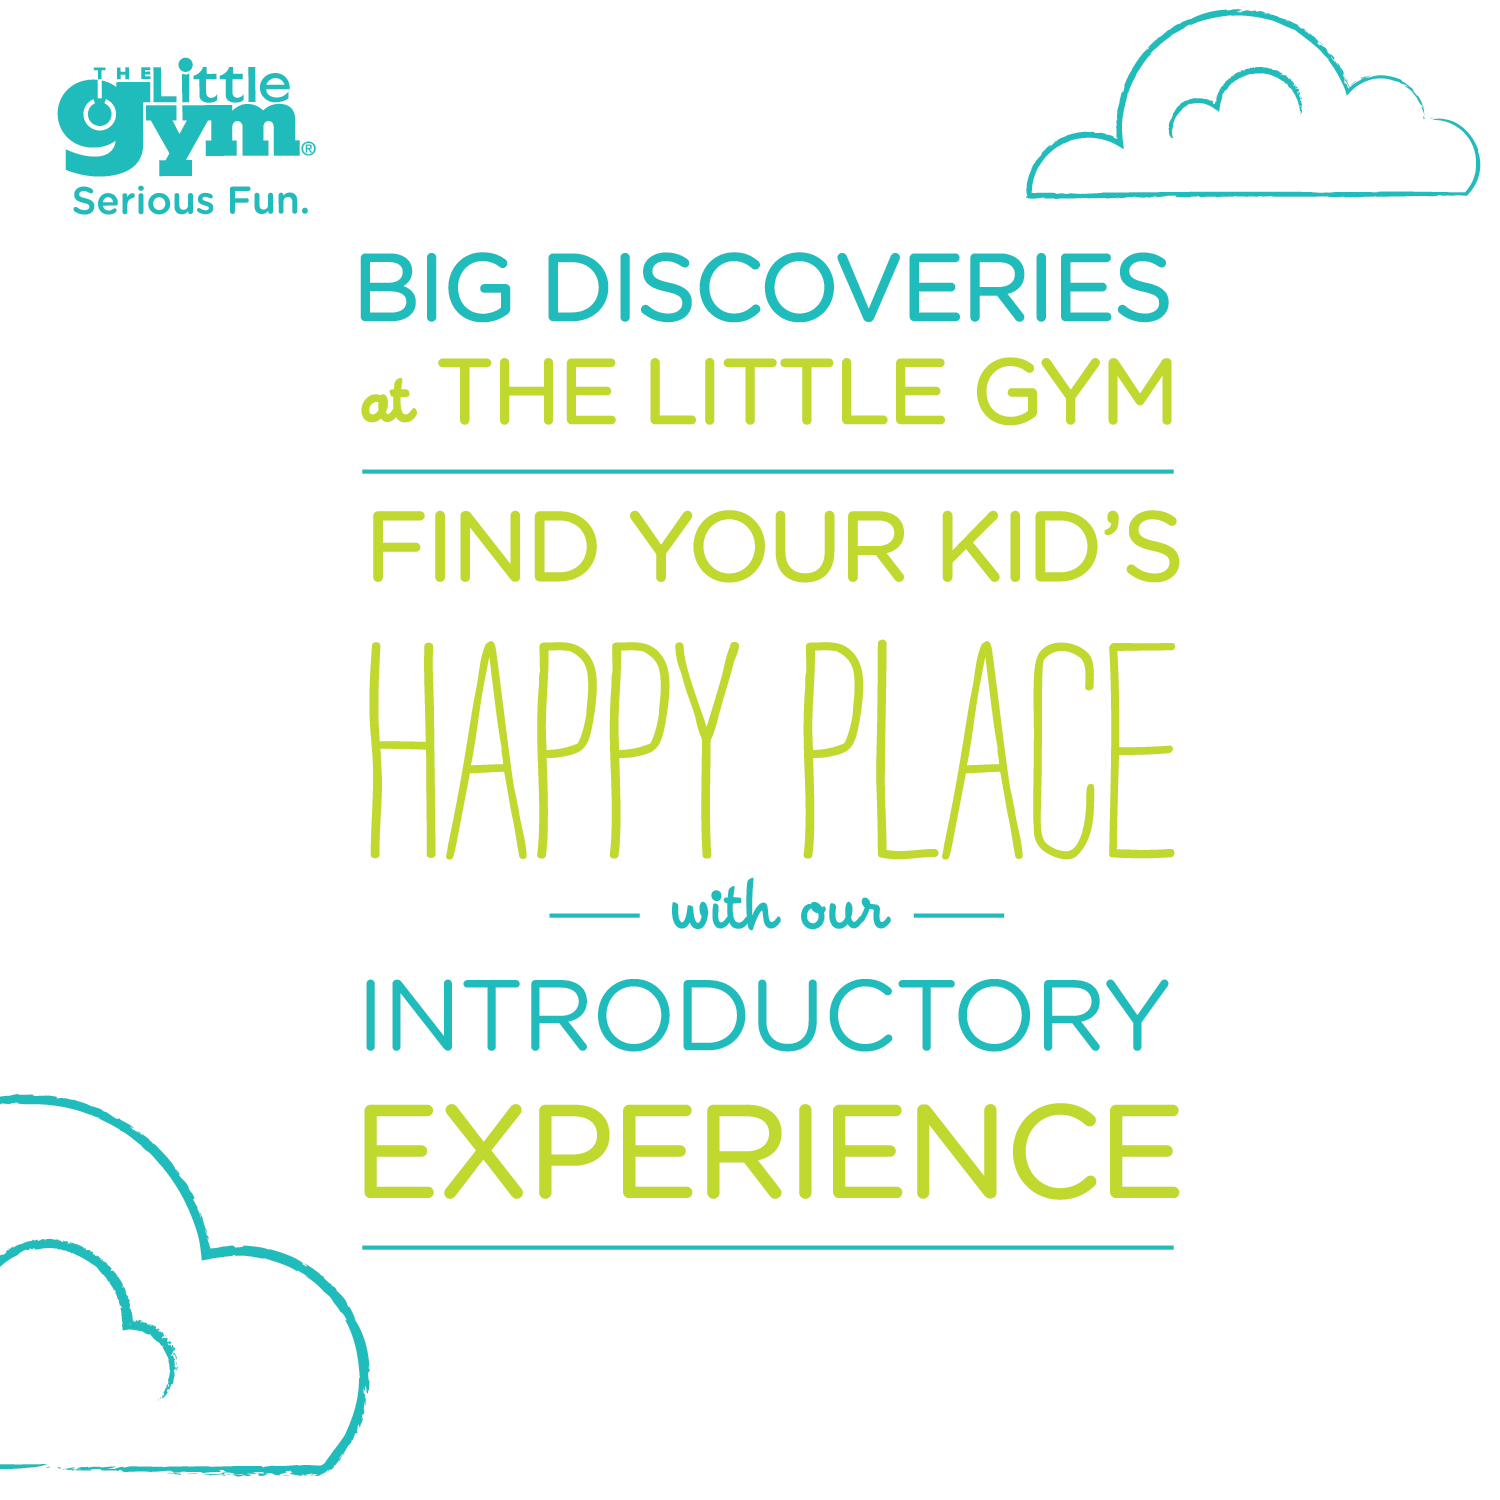 Find your Kid's Happy Place with our Introductory Experience